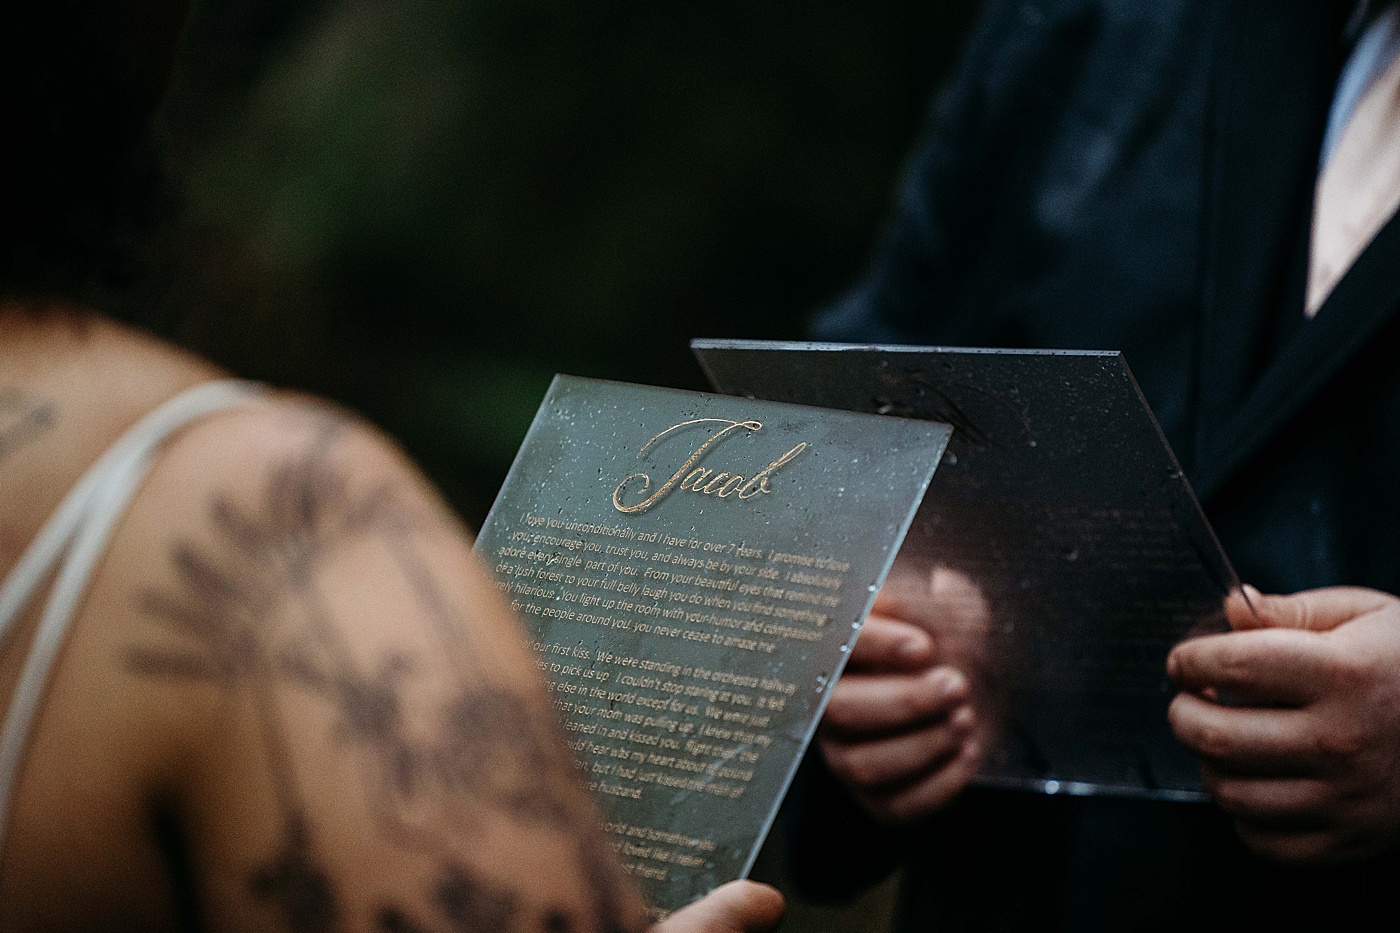 Personal vows during rainy elopement at Mount Rainier | Photo by Megan Montalvo Photography